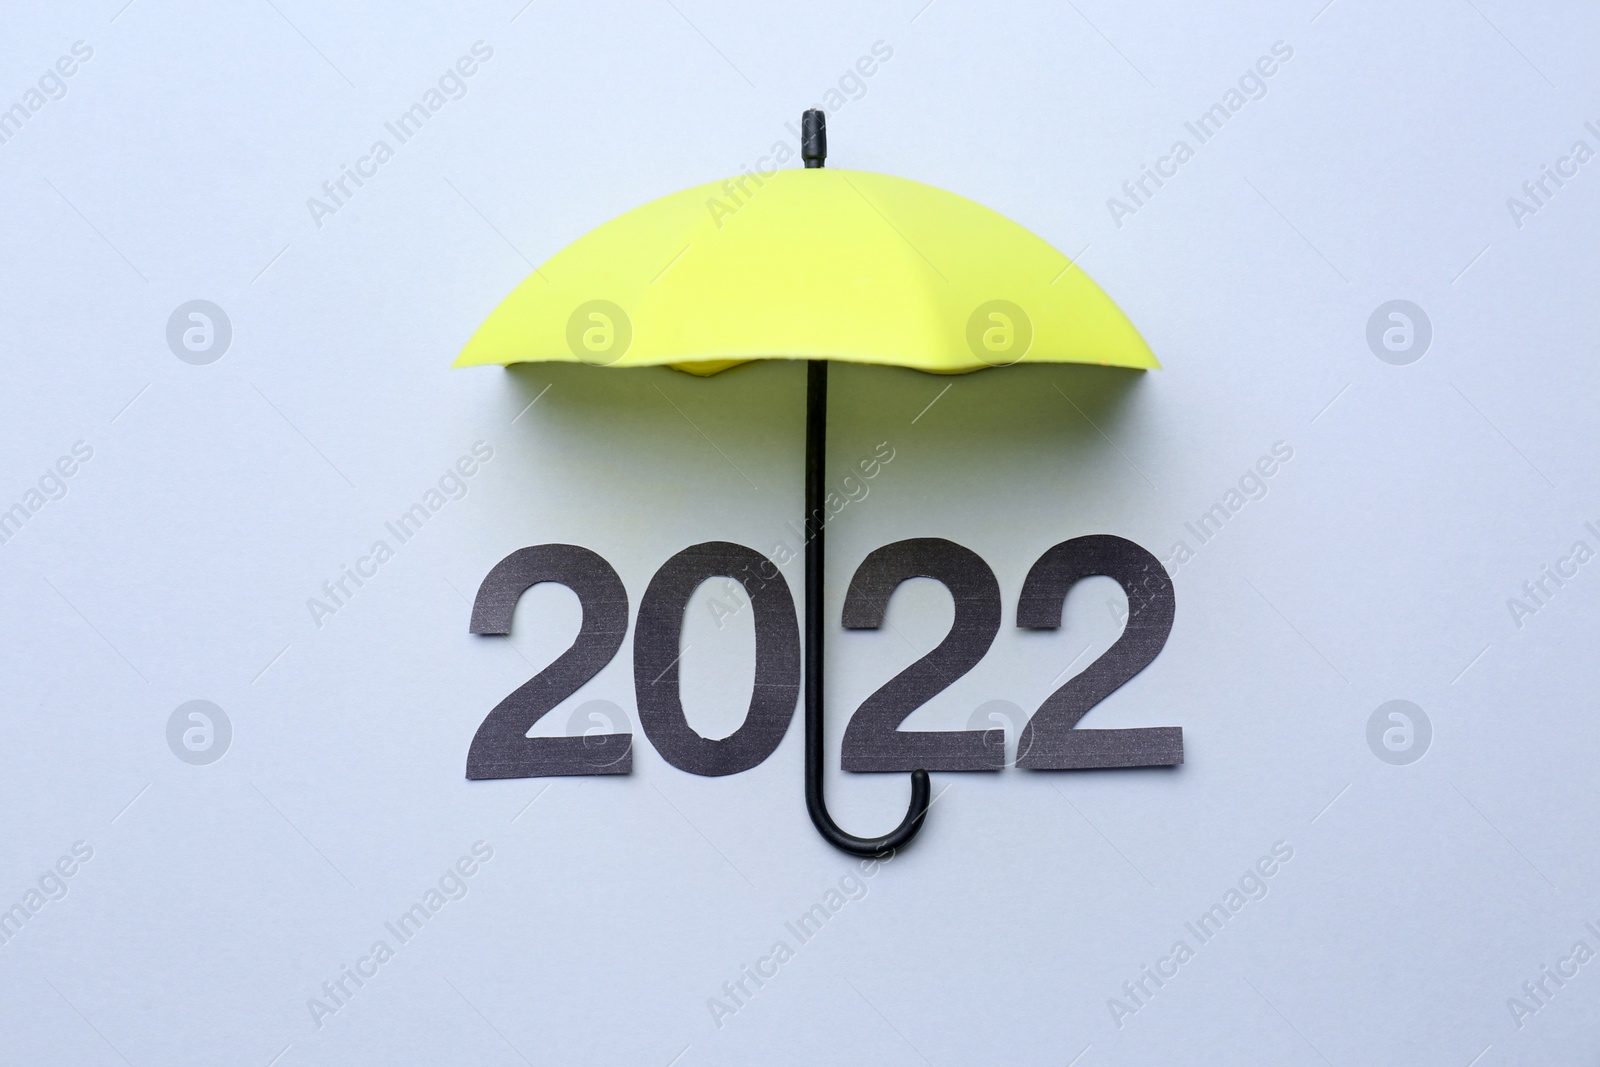 Photo of Mini umbrella and number 2022 on white background, top view